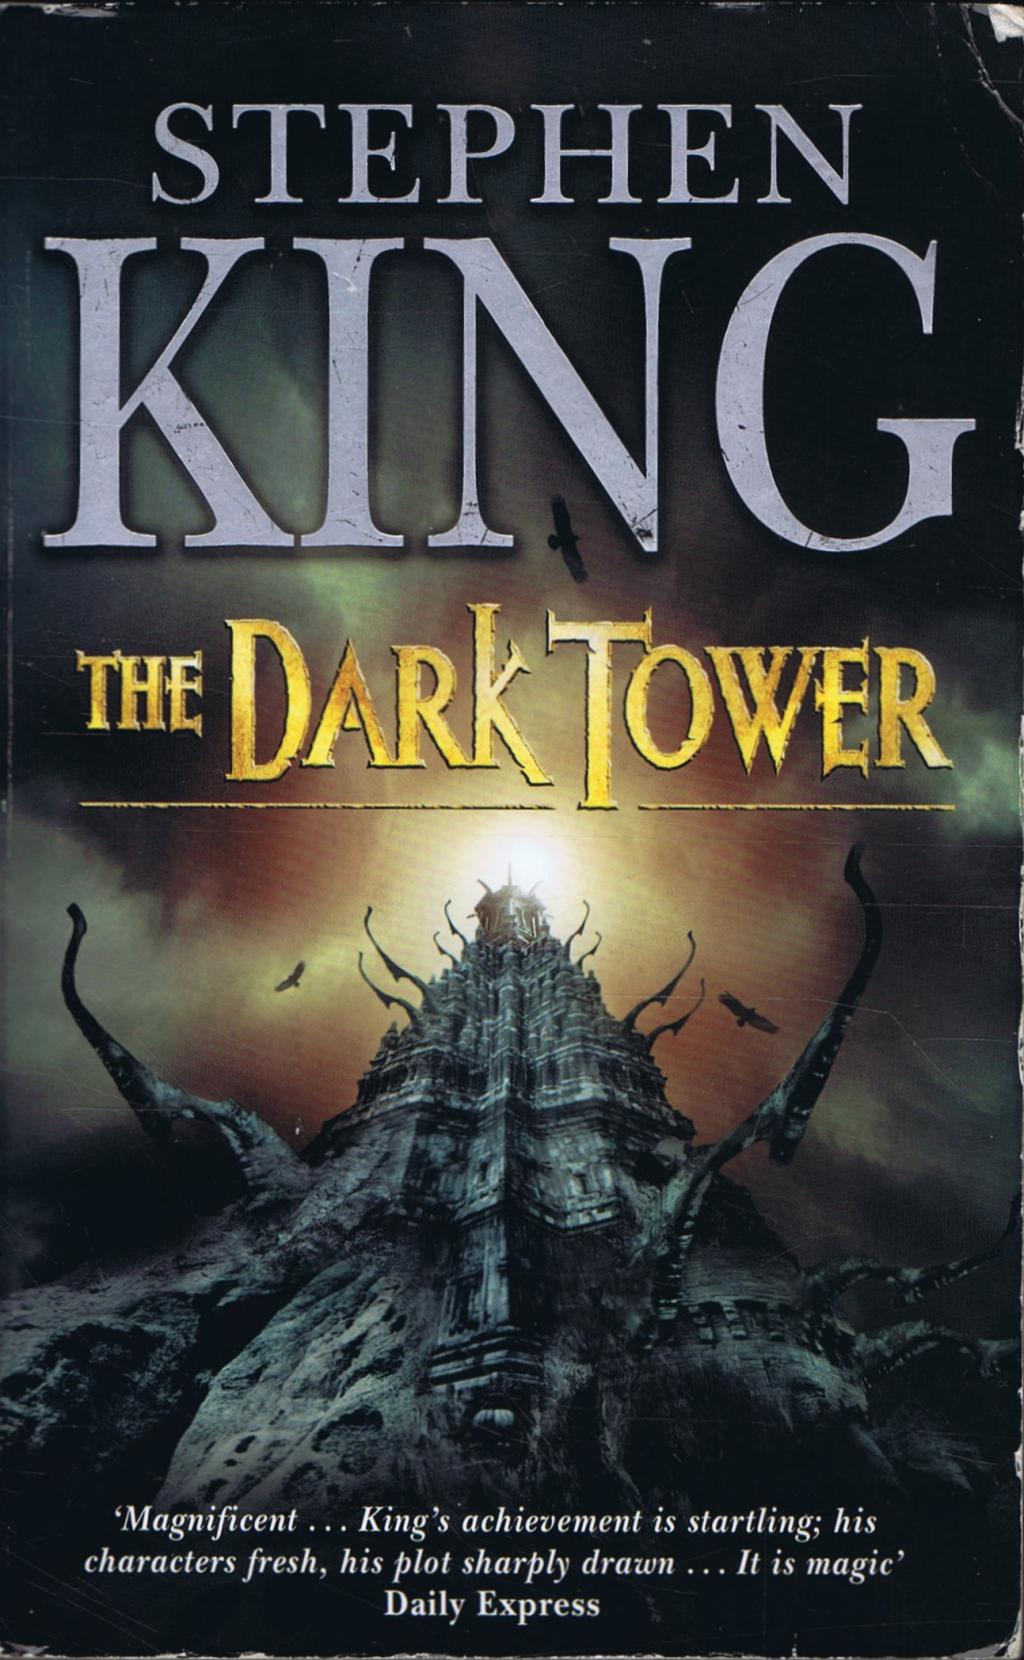 The Dark Tower download the new version for ipod